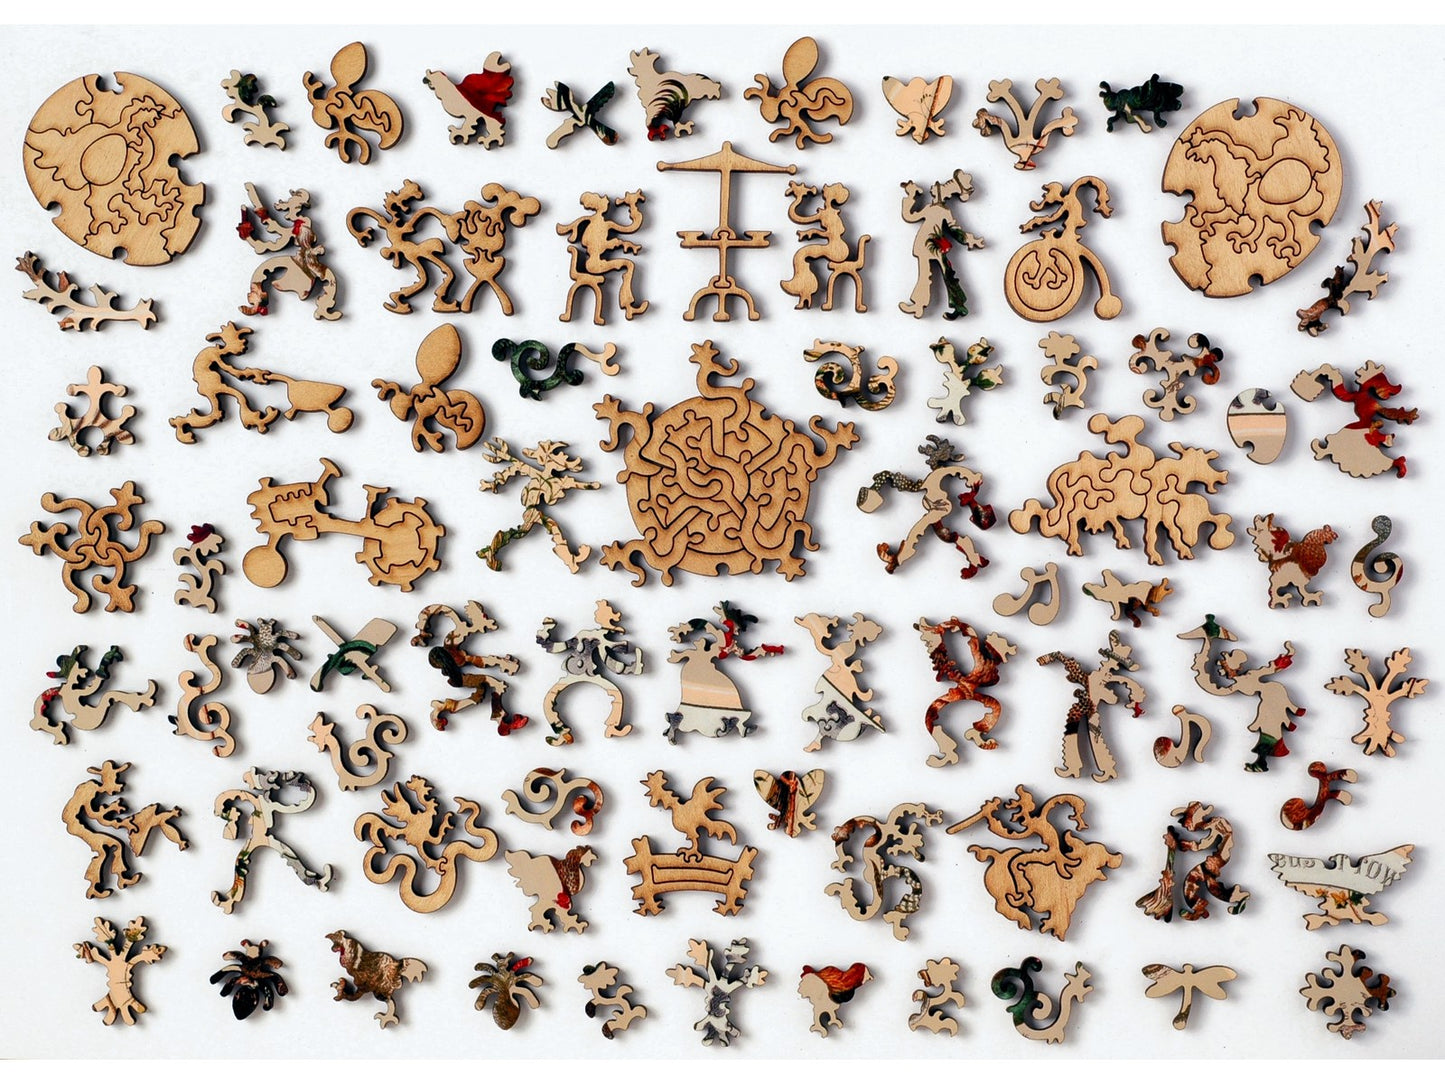 The whimsy pieces that can be found in the puzzle, Poultry of the World.